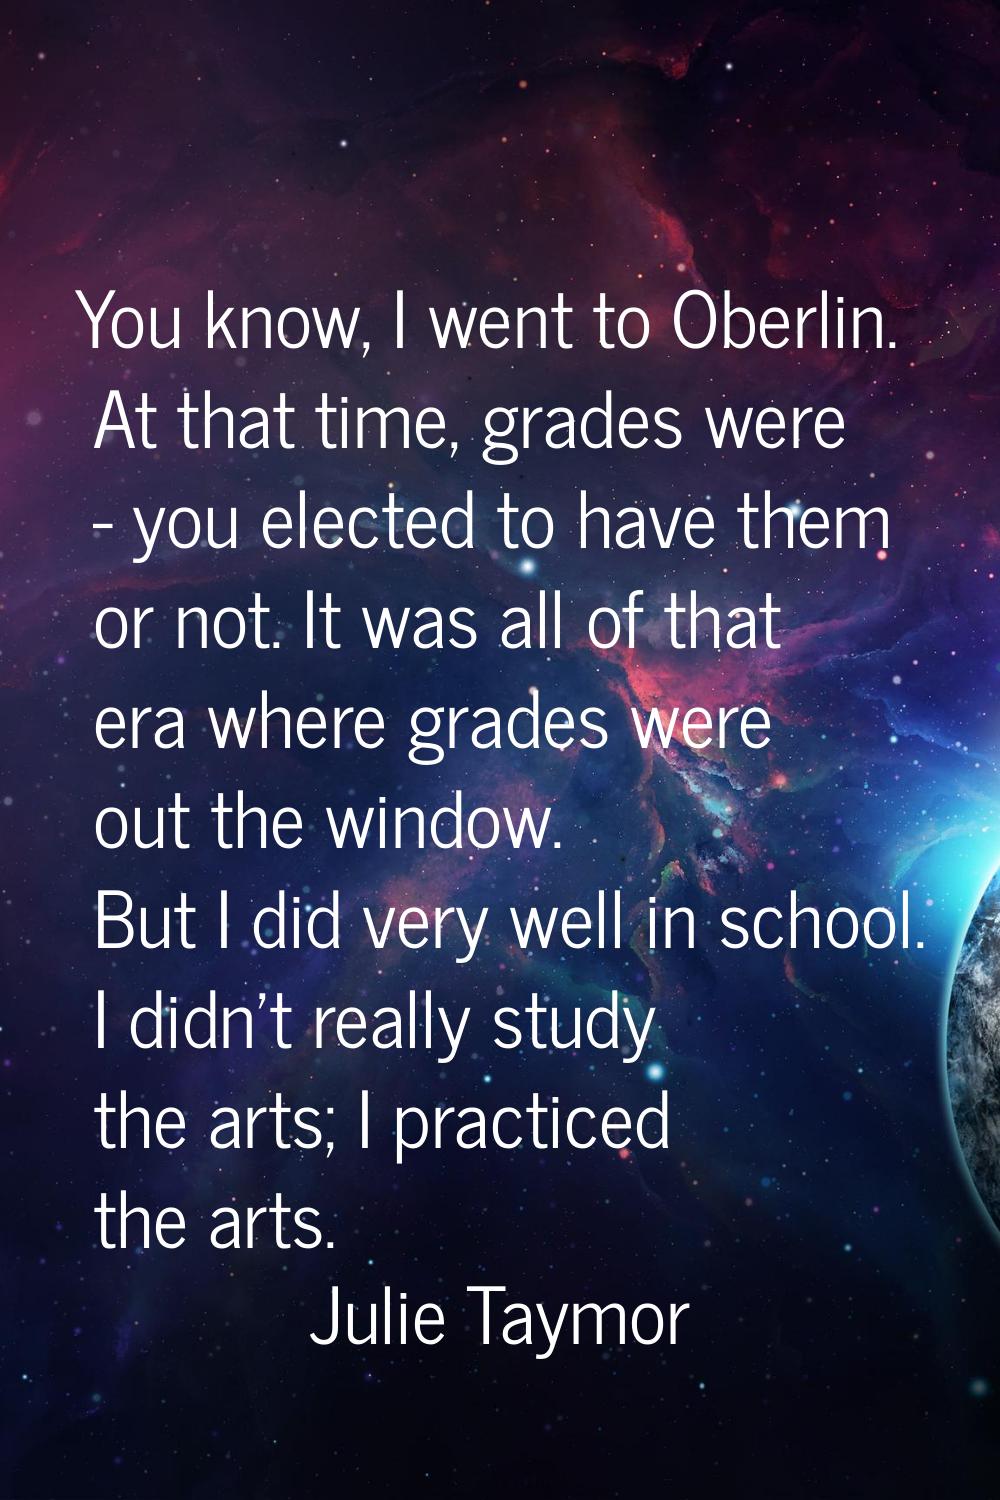 You know, I went to Oberlin. At that time, grades were - you elected to have them or not. It was al